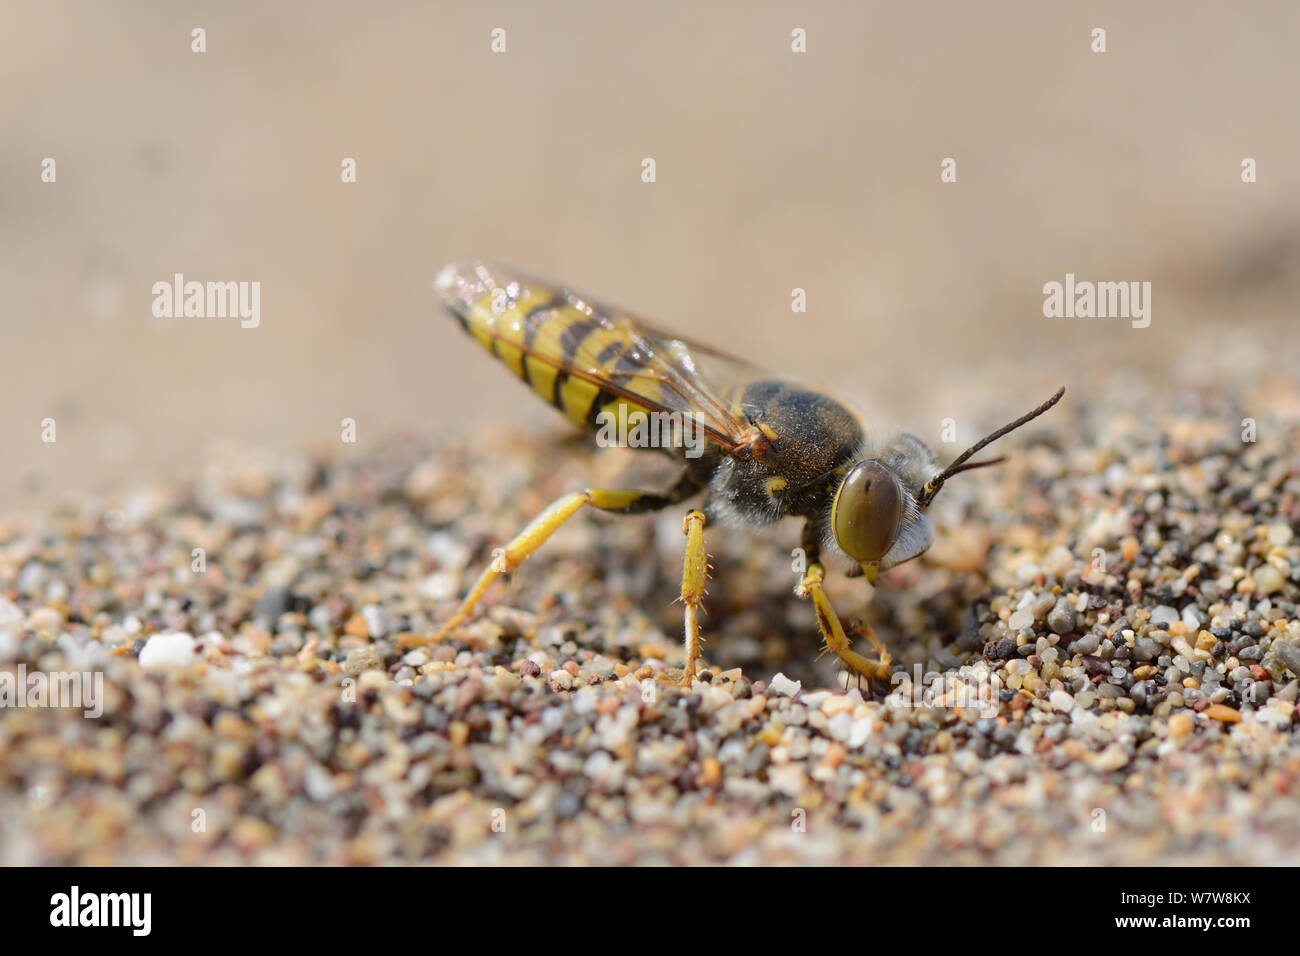 Female Sand wasp / Digger wasp (Bembix oculata) excavating a nest hole in beach sand, Crete, Greece, May. Stock Photo